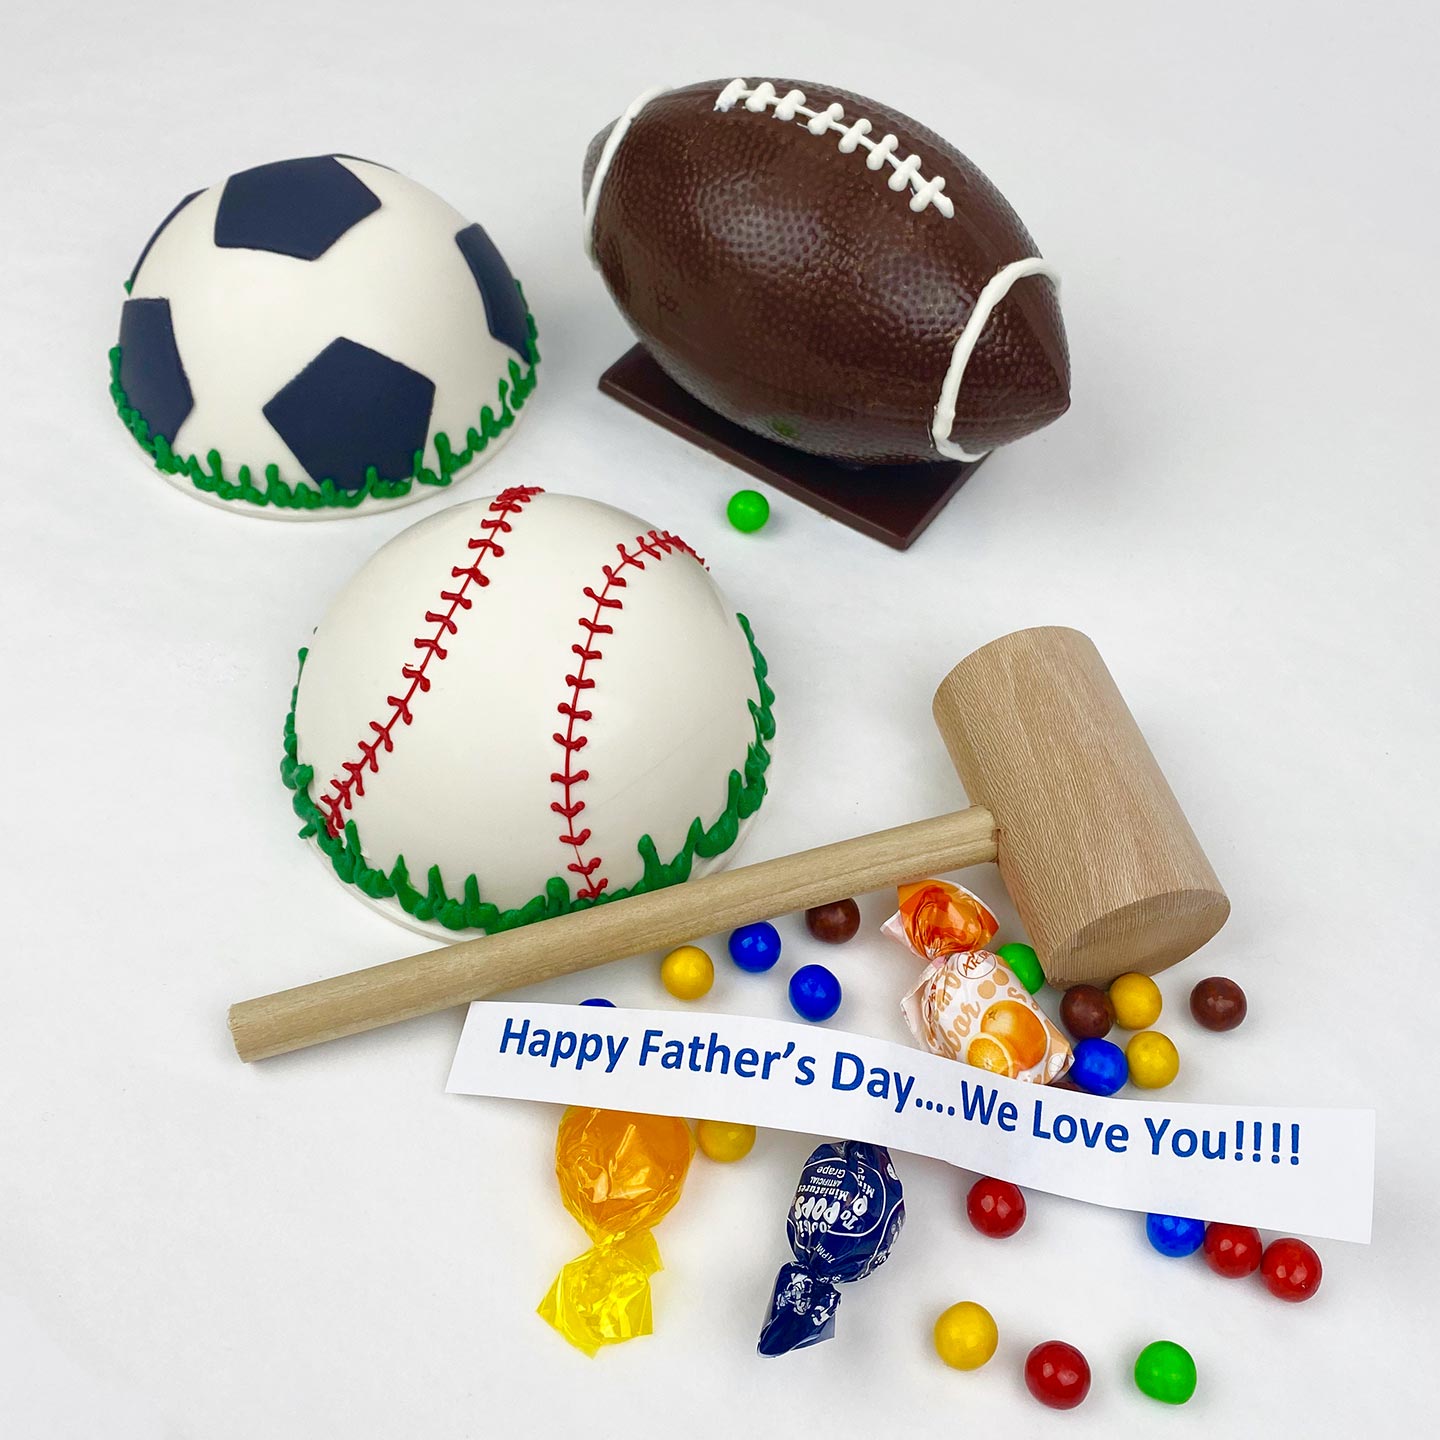 A mallet, baseball, football, soccer ball Piñata filled with candy